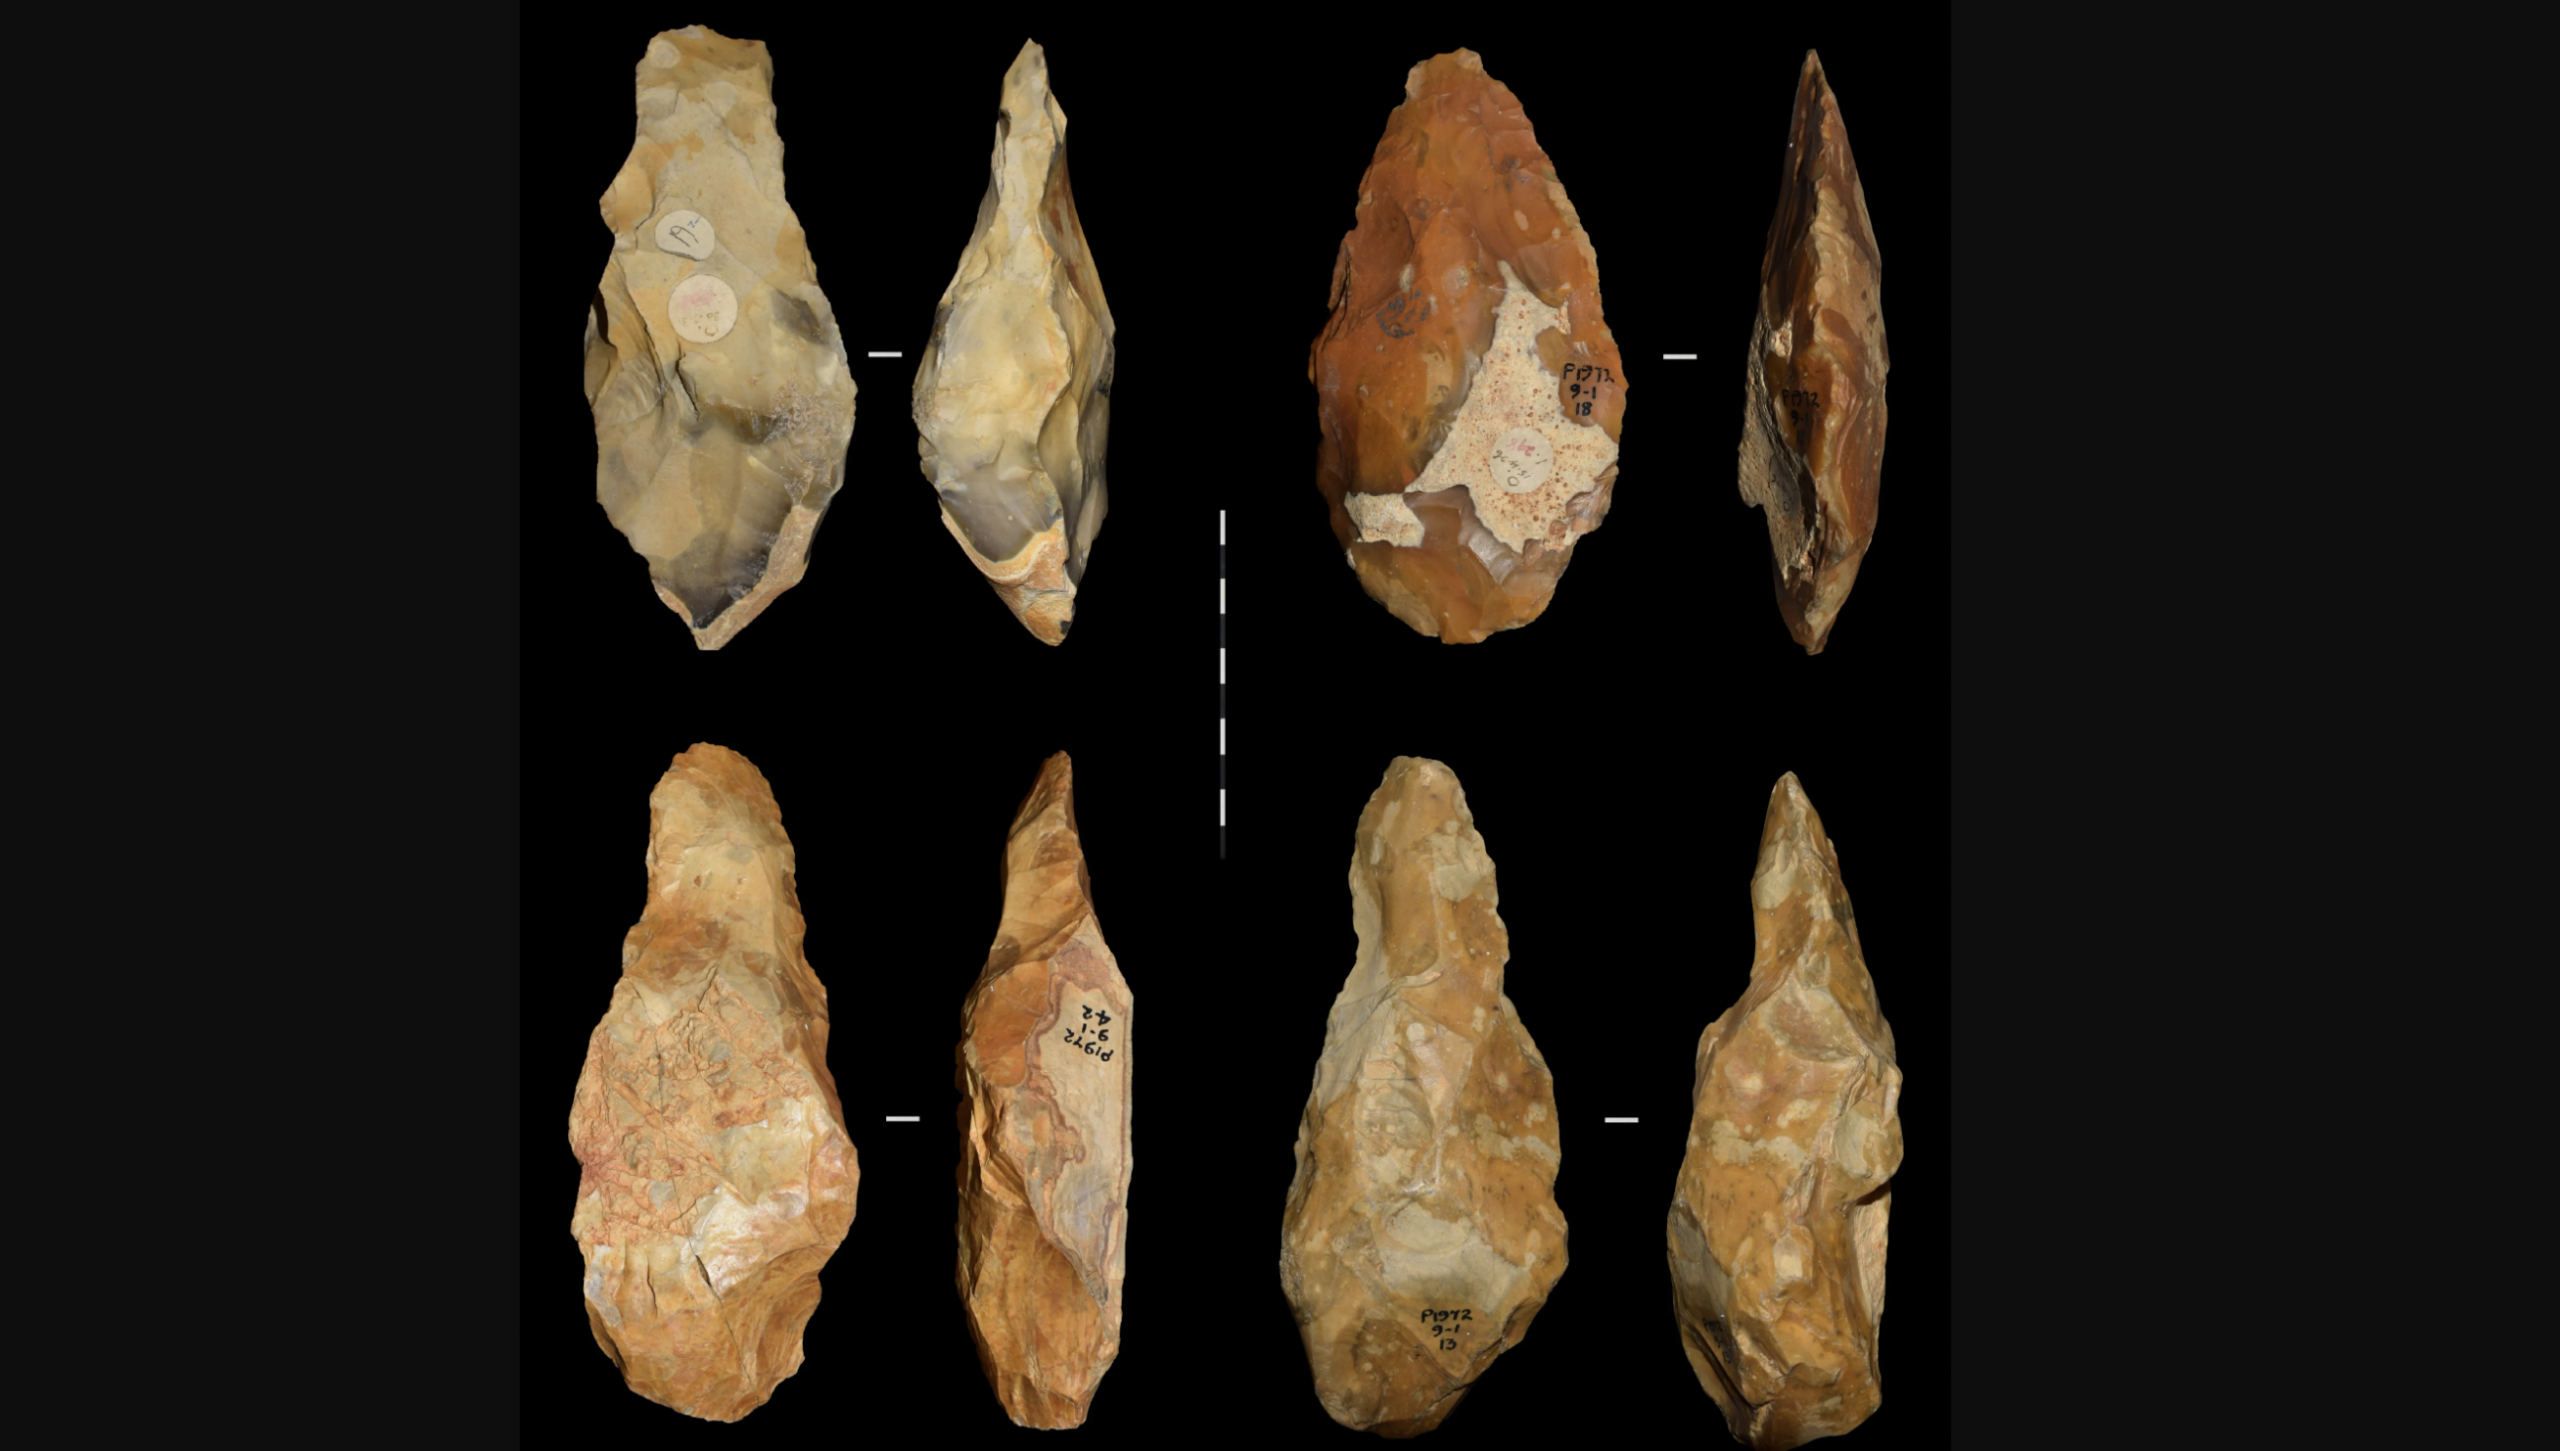 A selection of handaxes discovered in the 1920s. Image: authors of the research. University of Cambridge.